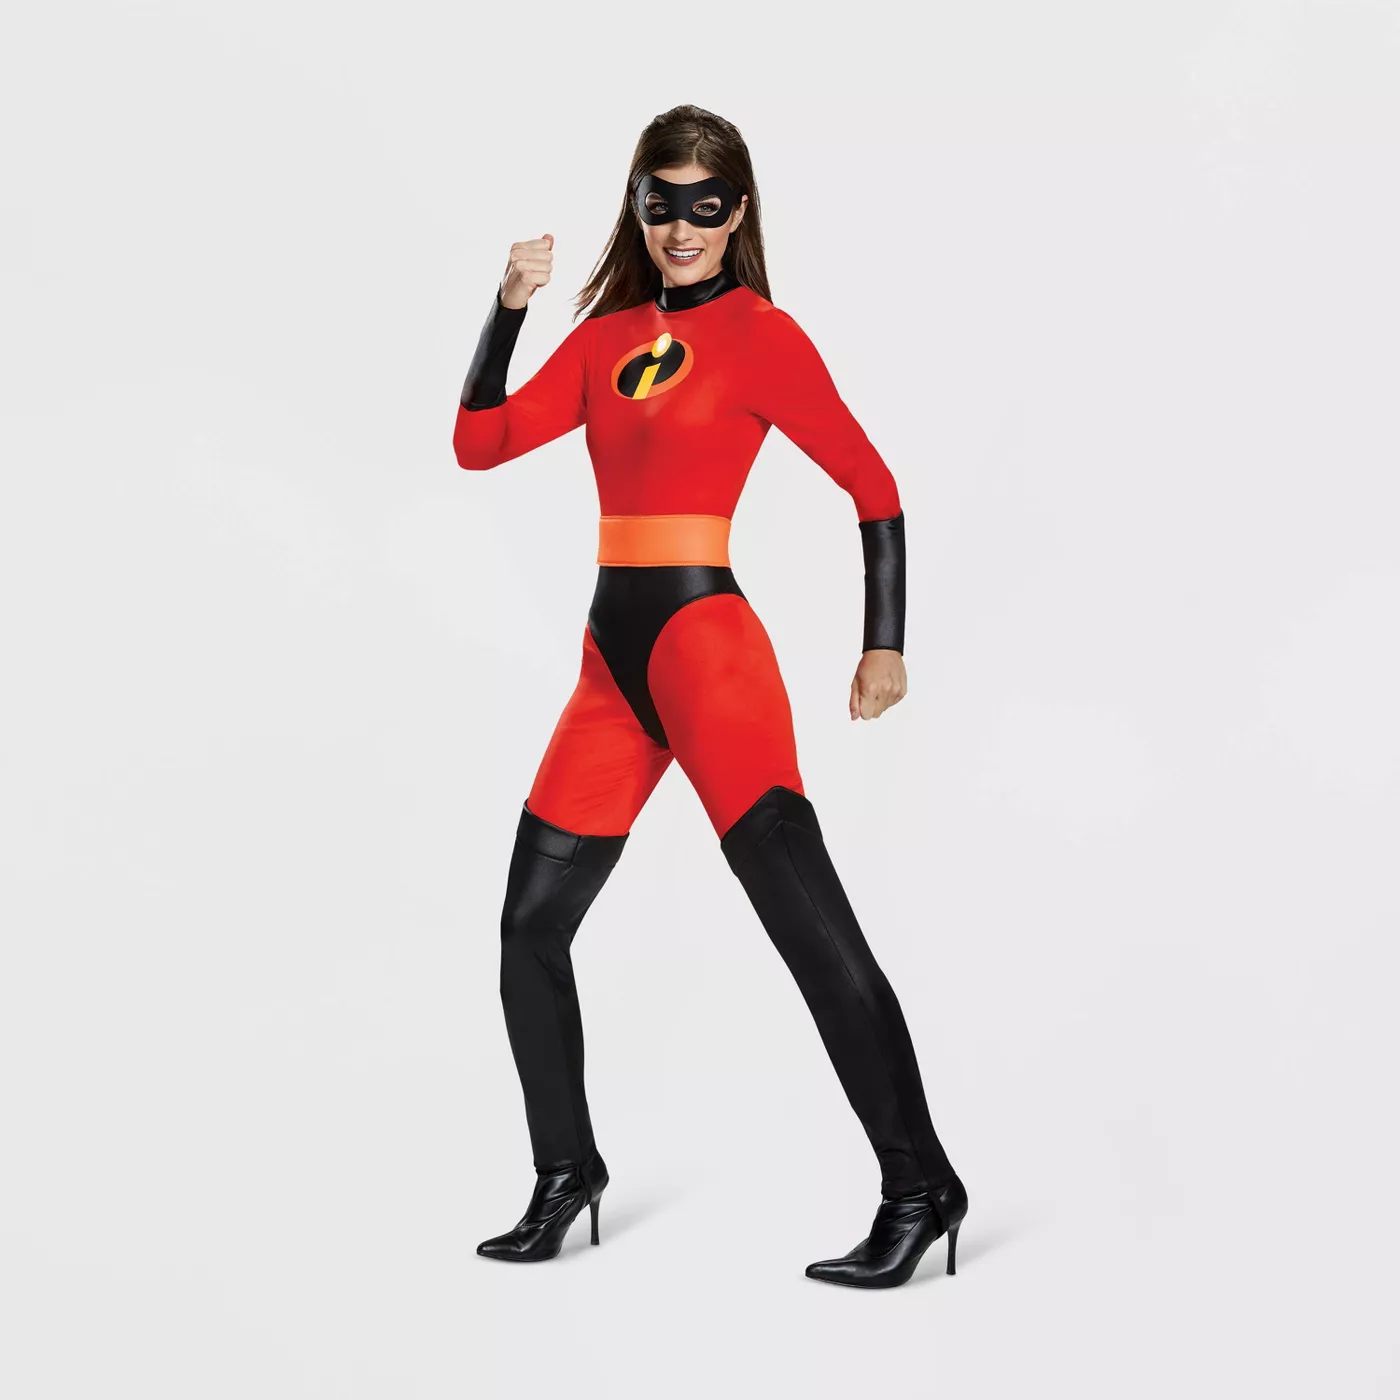 Women's The Incredibles Mrs. Incredible Classic Halloween Costume - image 1 of 1